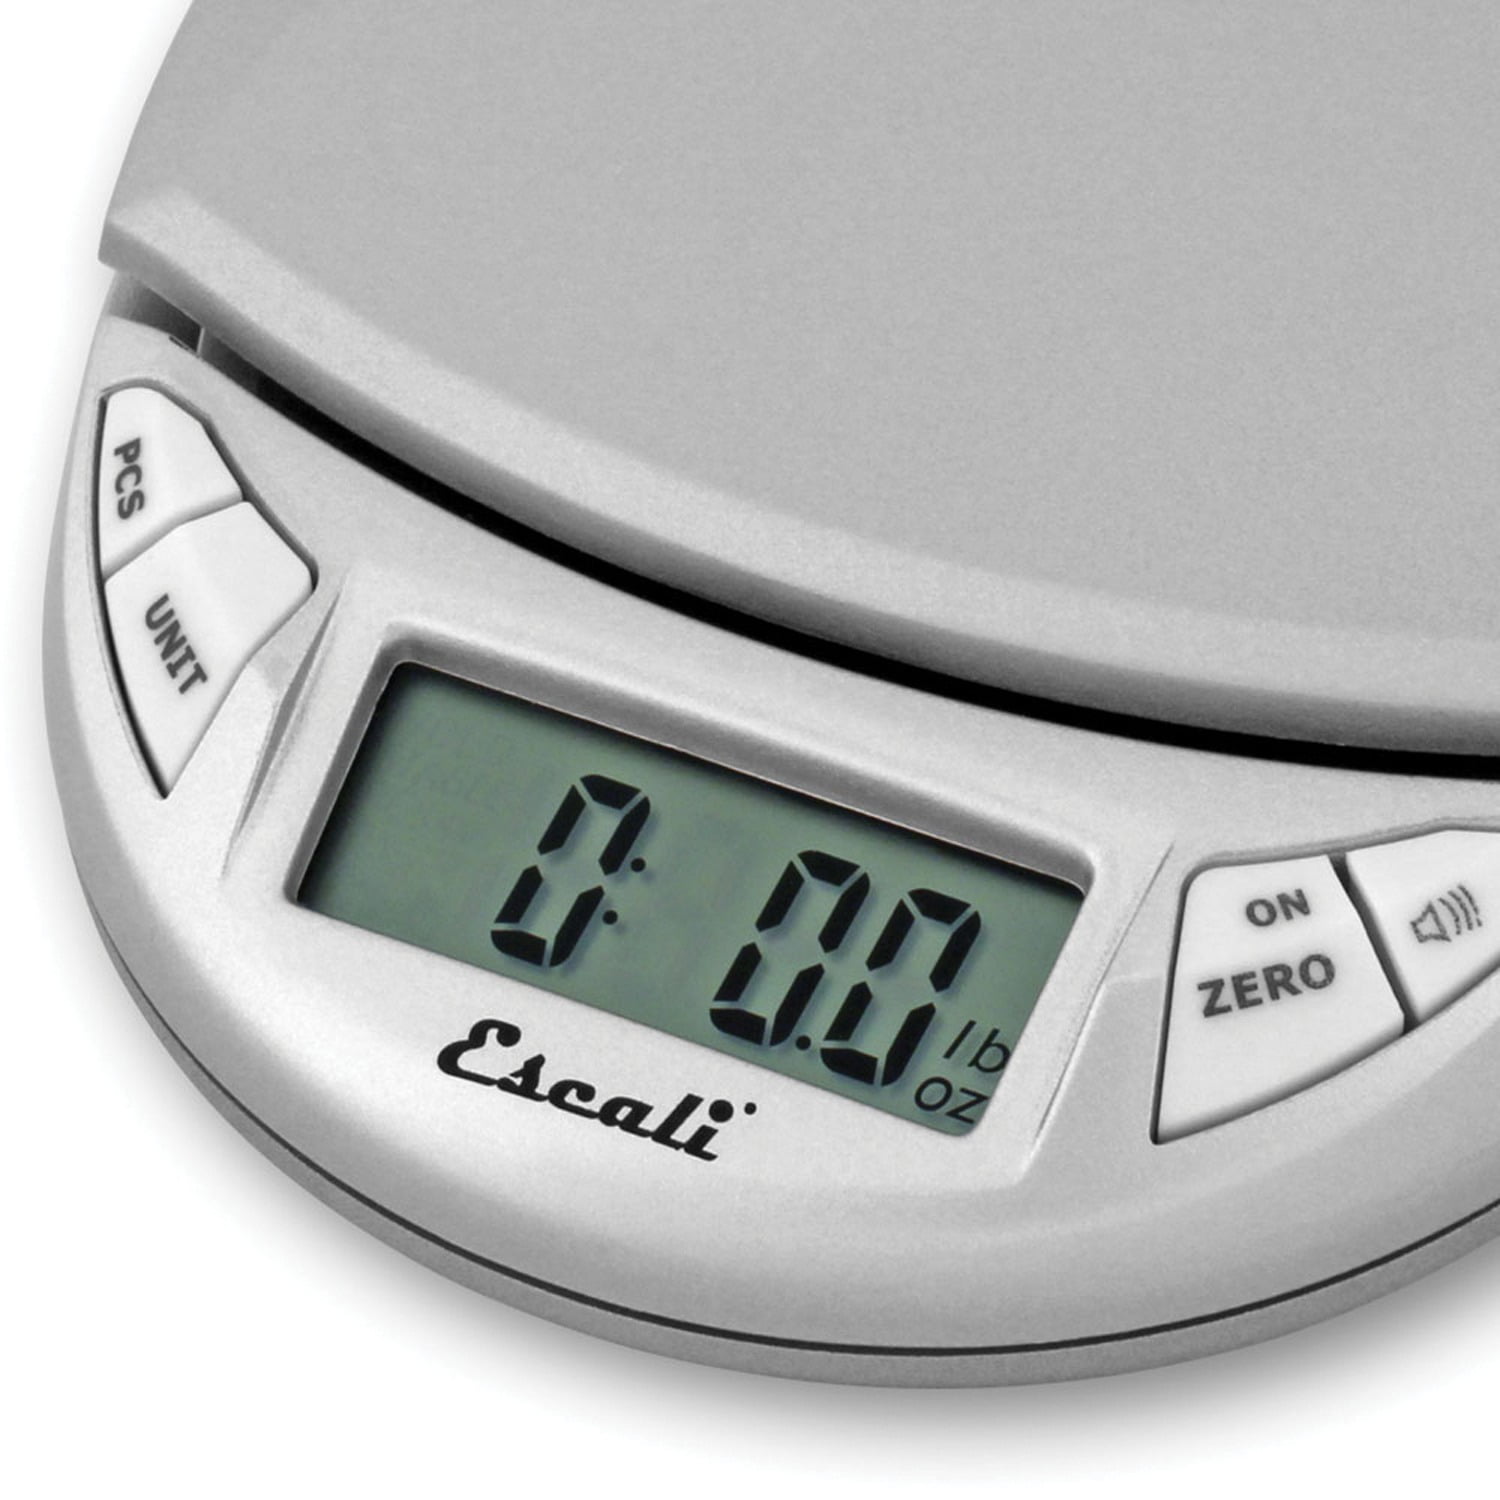 Escali Pico Scale for only $24.95 at Aztec Candle & Soap Making Supplies